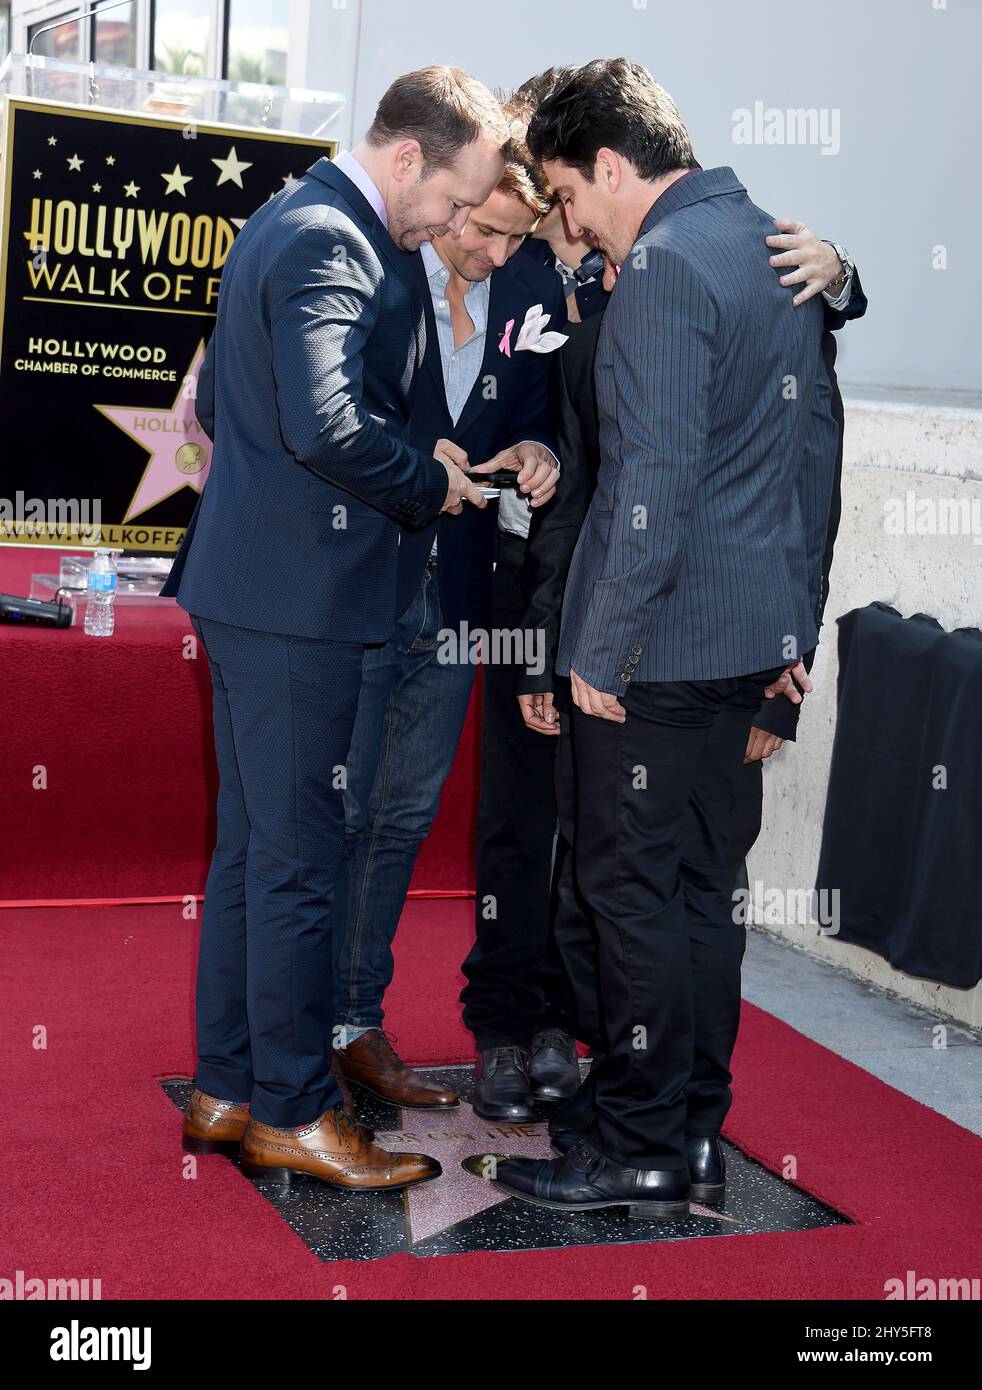 Donnie Wahlberg, Jordan Knight, Jonathan Knight, Joey McIntyre and Danny Wood attending the New Kids on the Block Walk of Fame Star Ceremony on Hollywood Blvd, Hollywood, California. Stock Photo